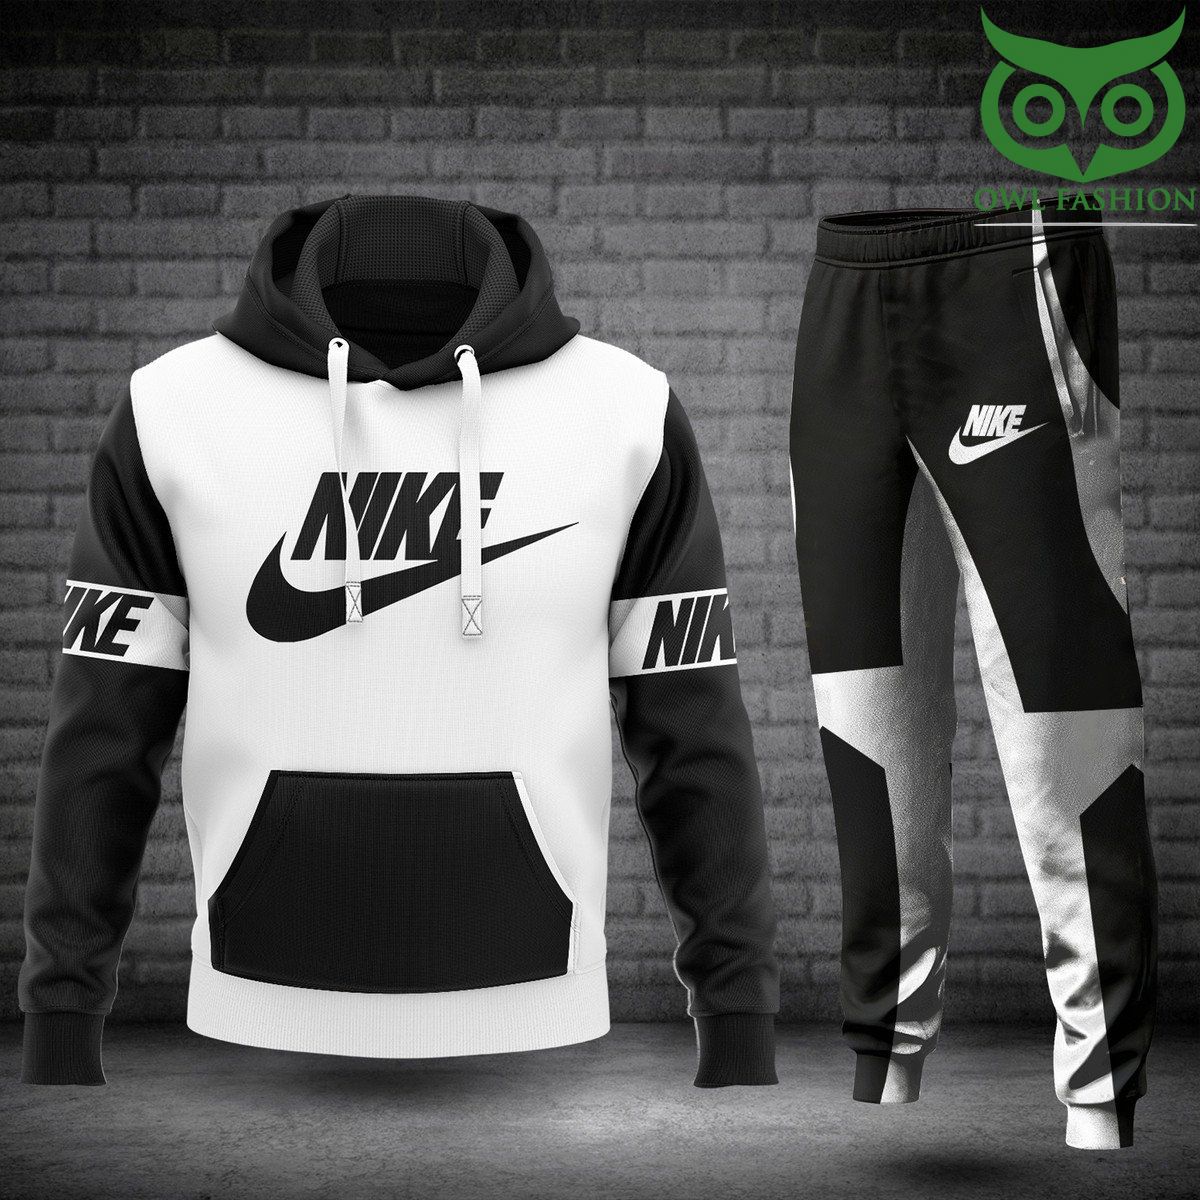 98 Nike white with black lines Hoodies and sweatpants